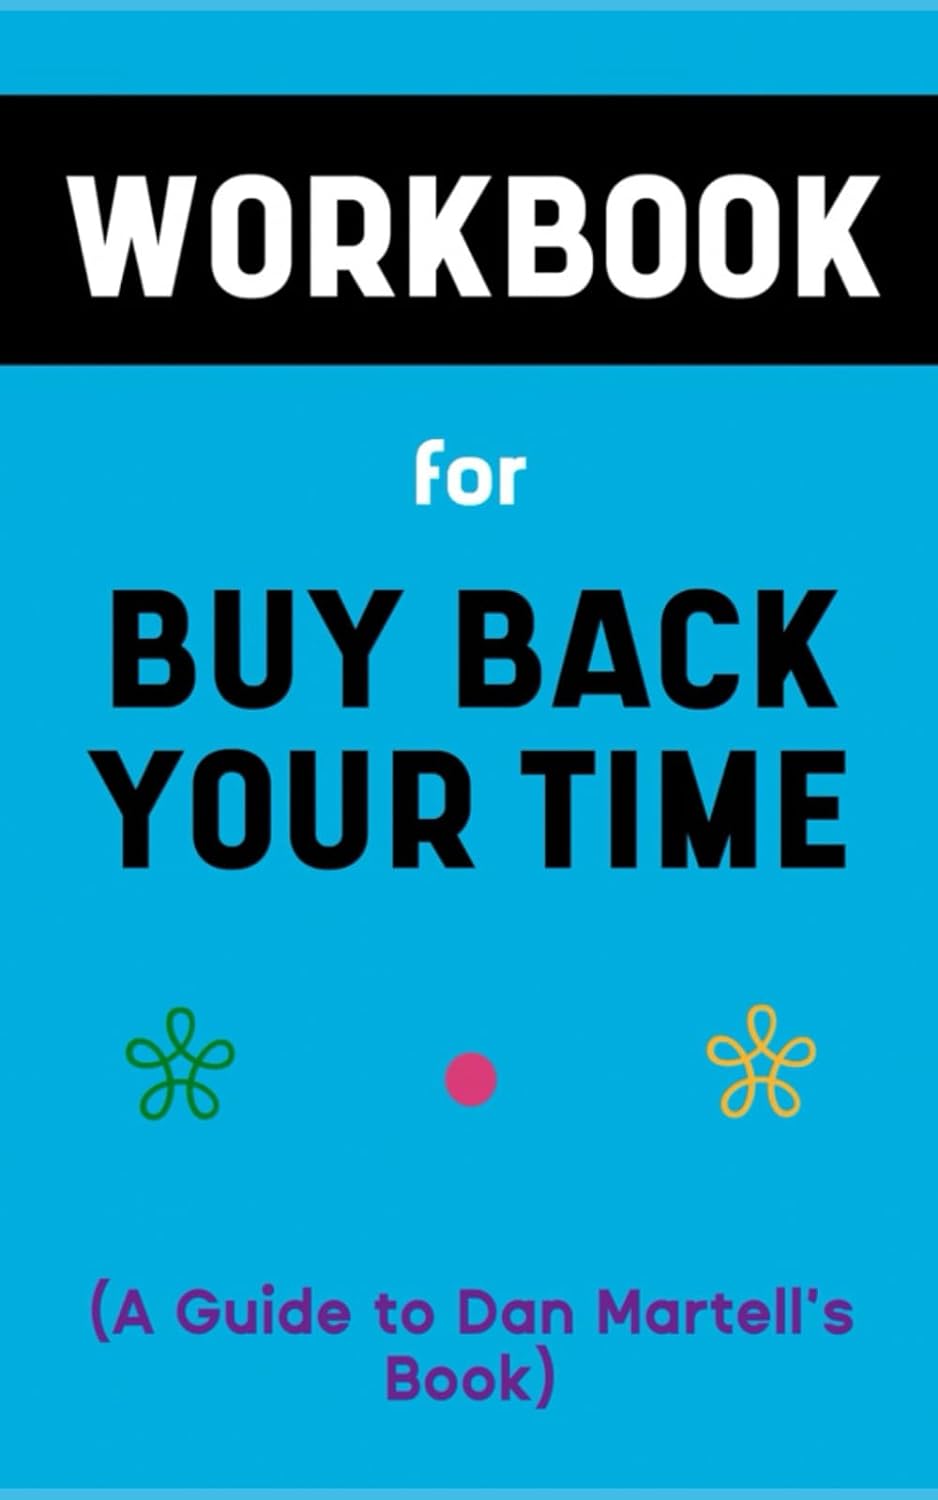 Workbook For Buy Back Your Time By Dan Martell